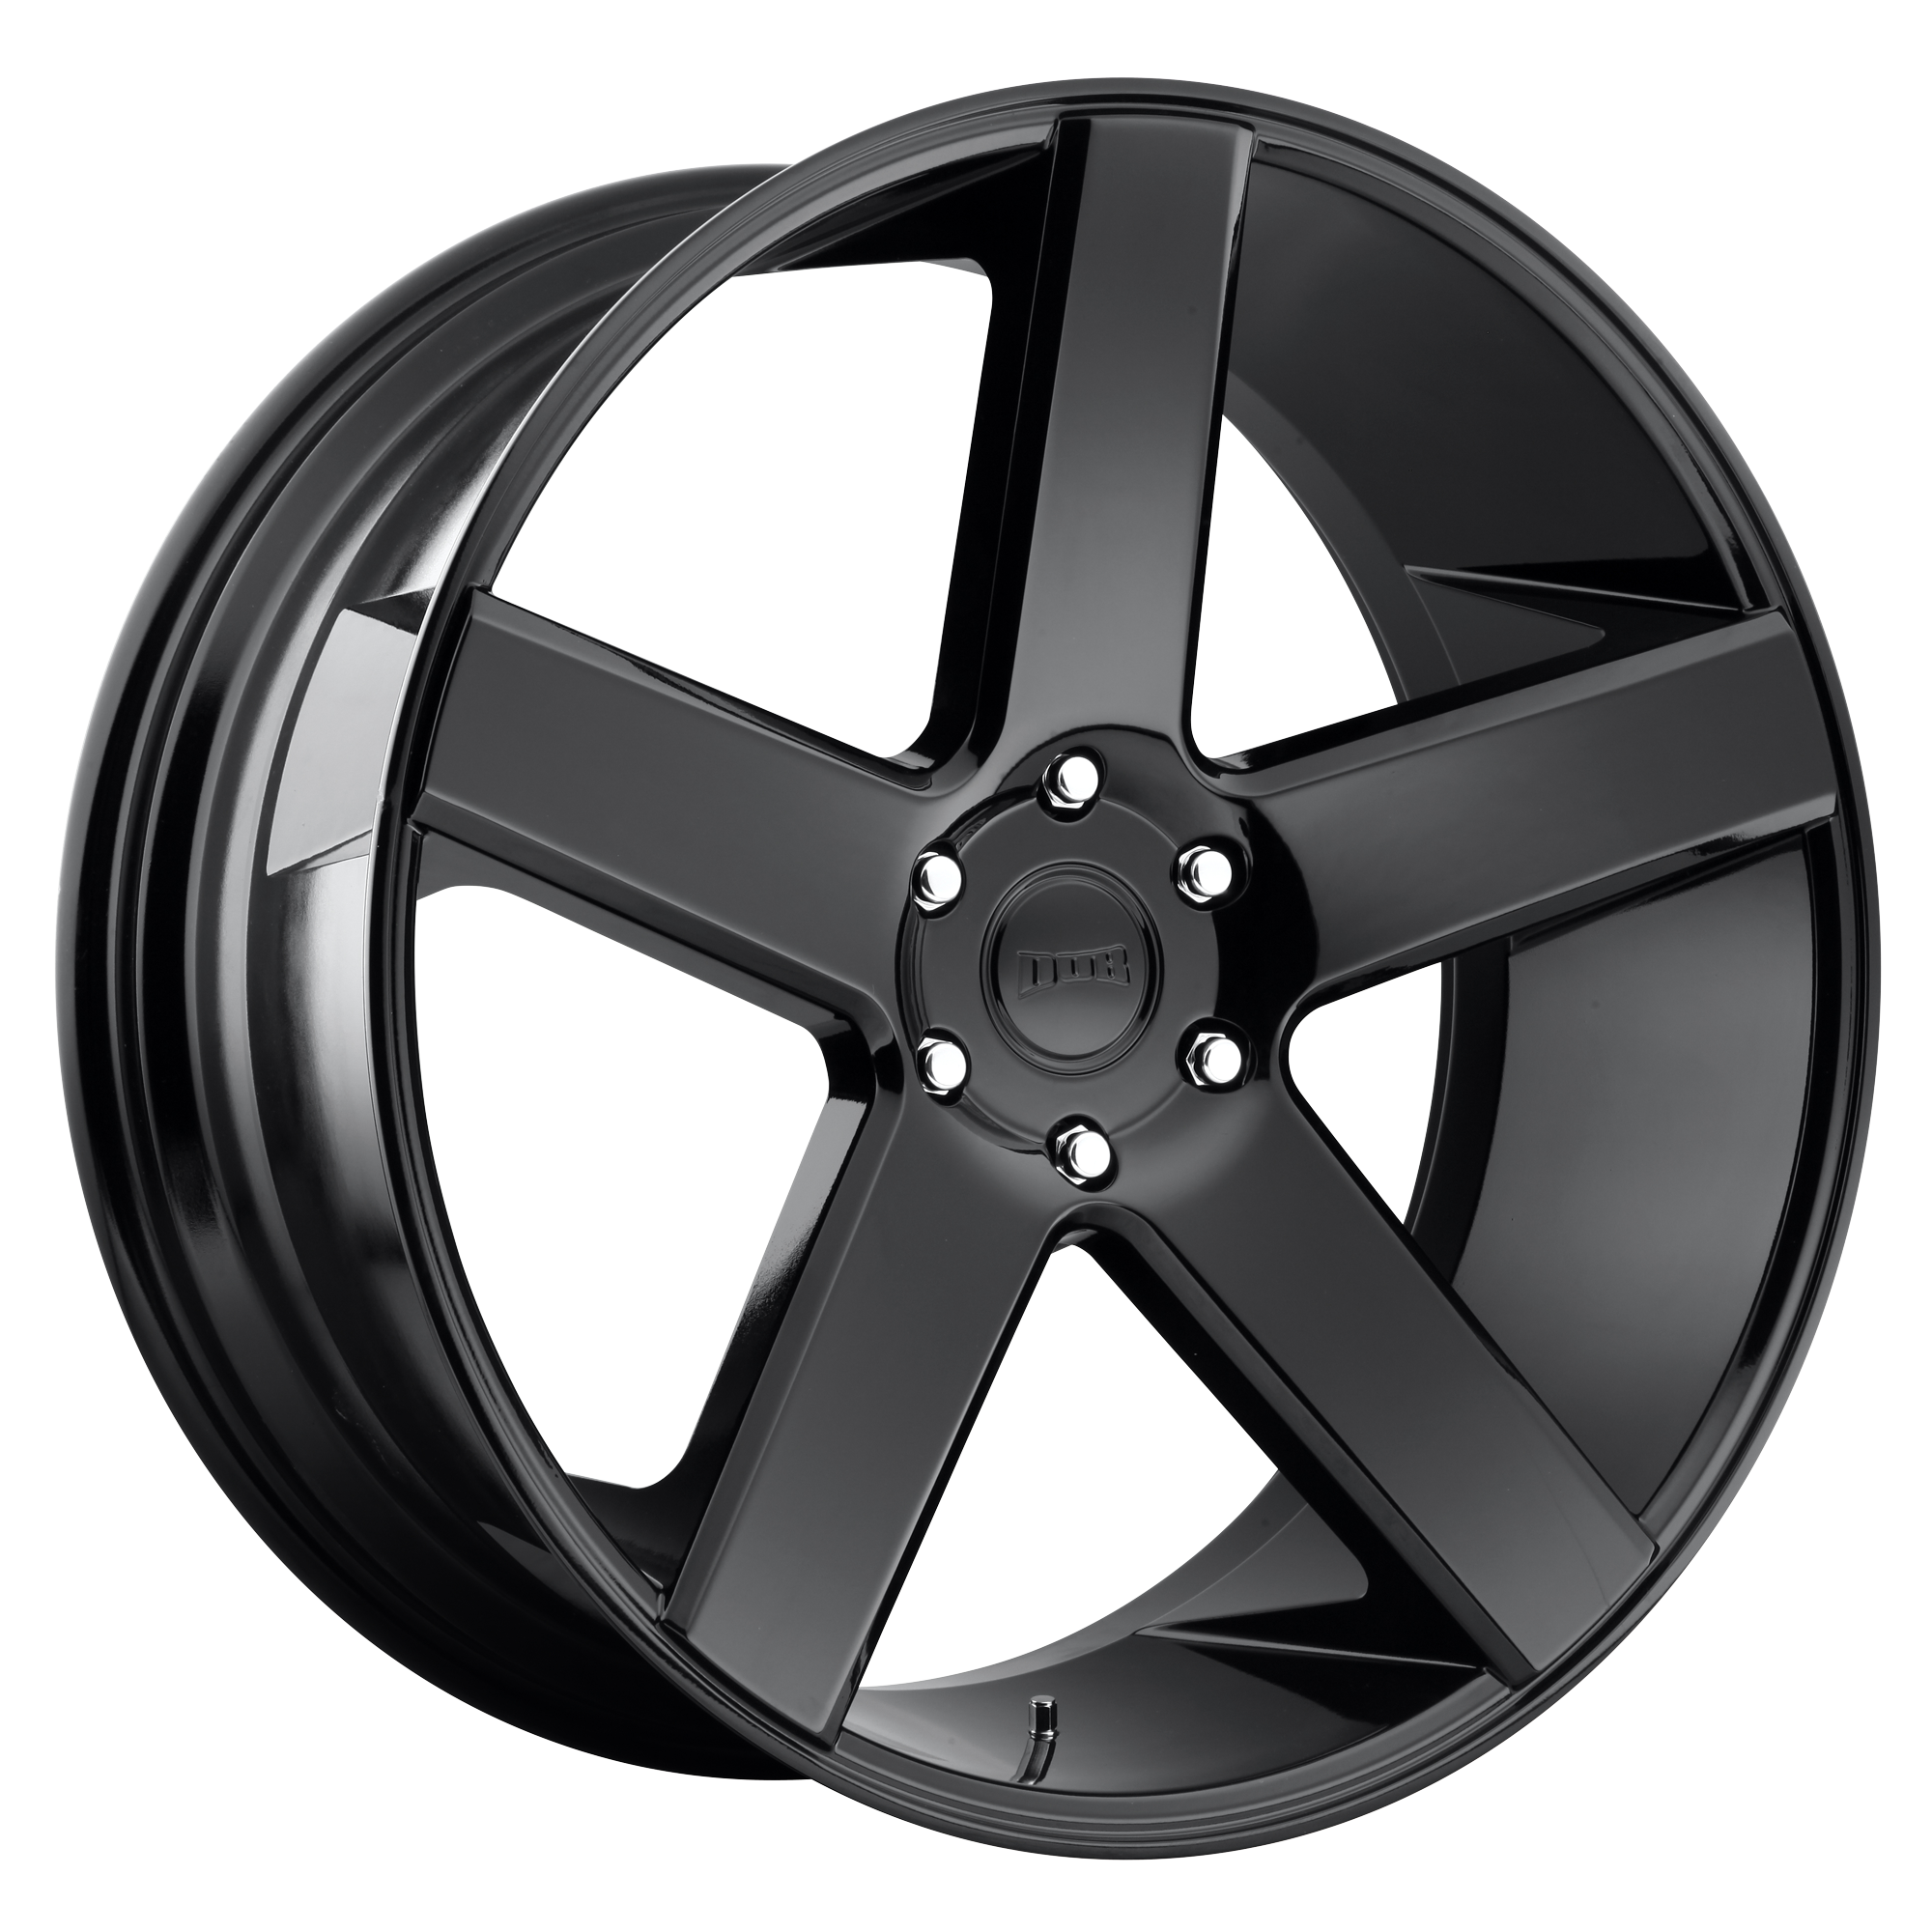 BALLER 24x10 5x127.00 GLOSS BLACK (11 mm) - Tires and Engine Performance